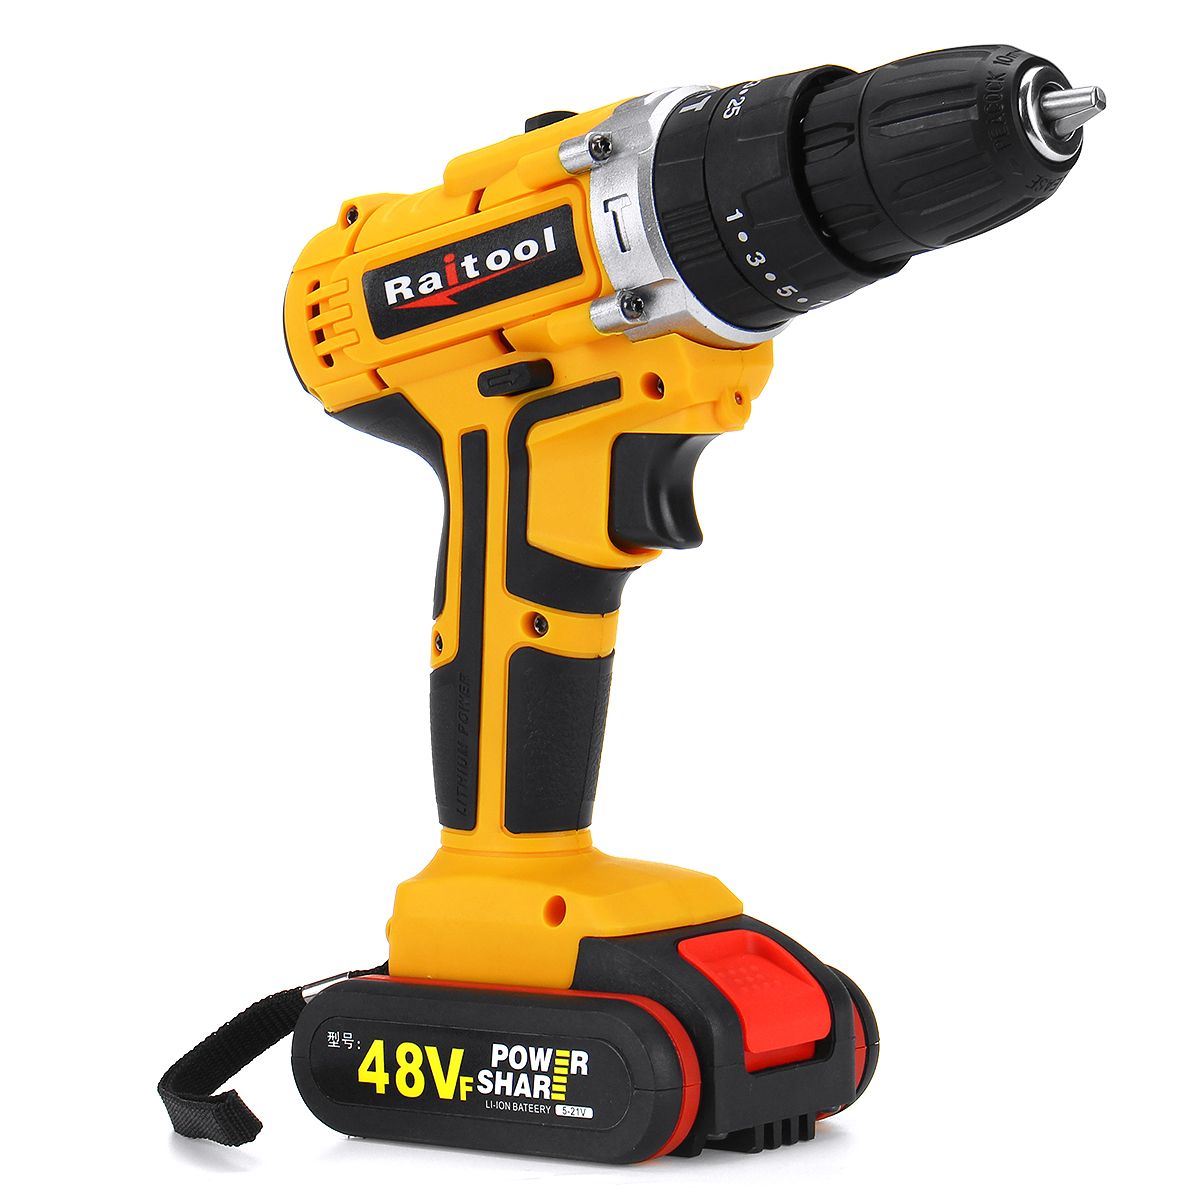 Raitool-48VF-Cordless-Electric-Impact-Drill-Rechargeable-38-inch-Drill-Screwdriver-W-1-or-2-Li-ion-B-1593335